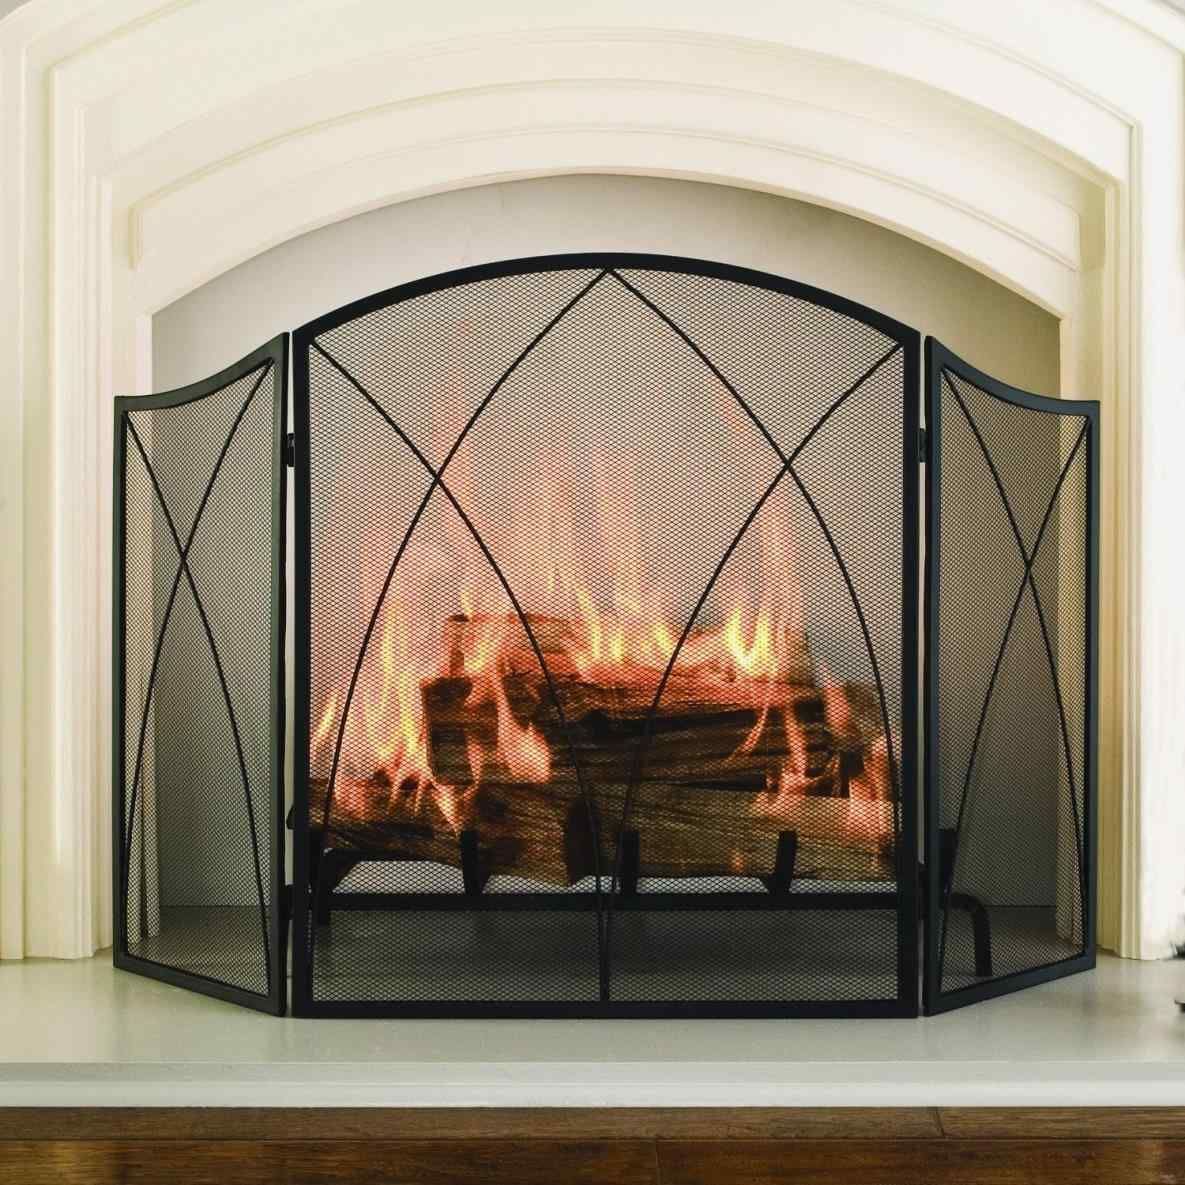 Spark Guard Fireplace Screen Awesome 11 Best Fancy Fireplace Screens Design and Decor Ideas